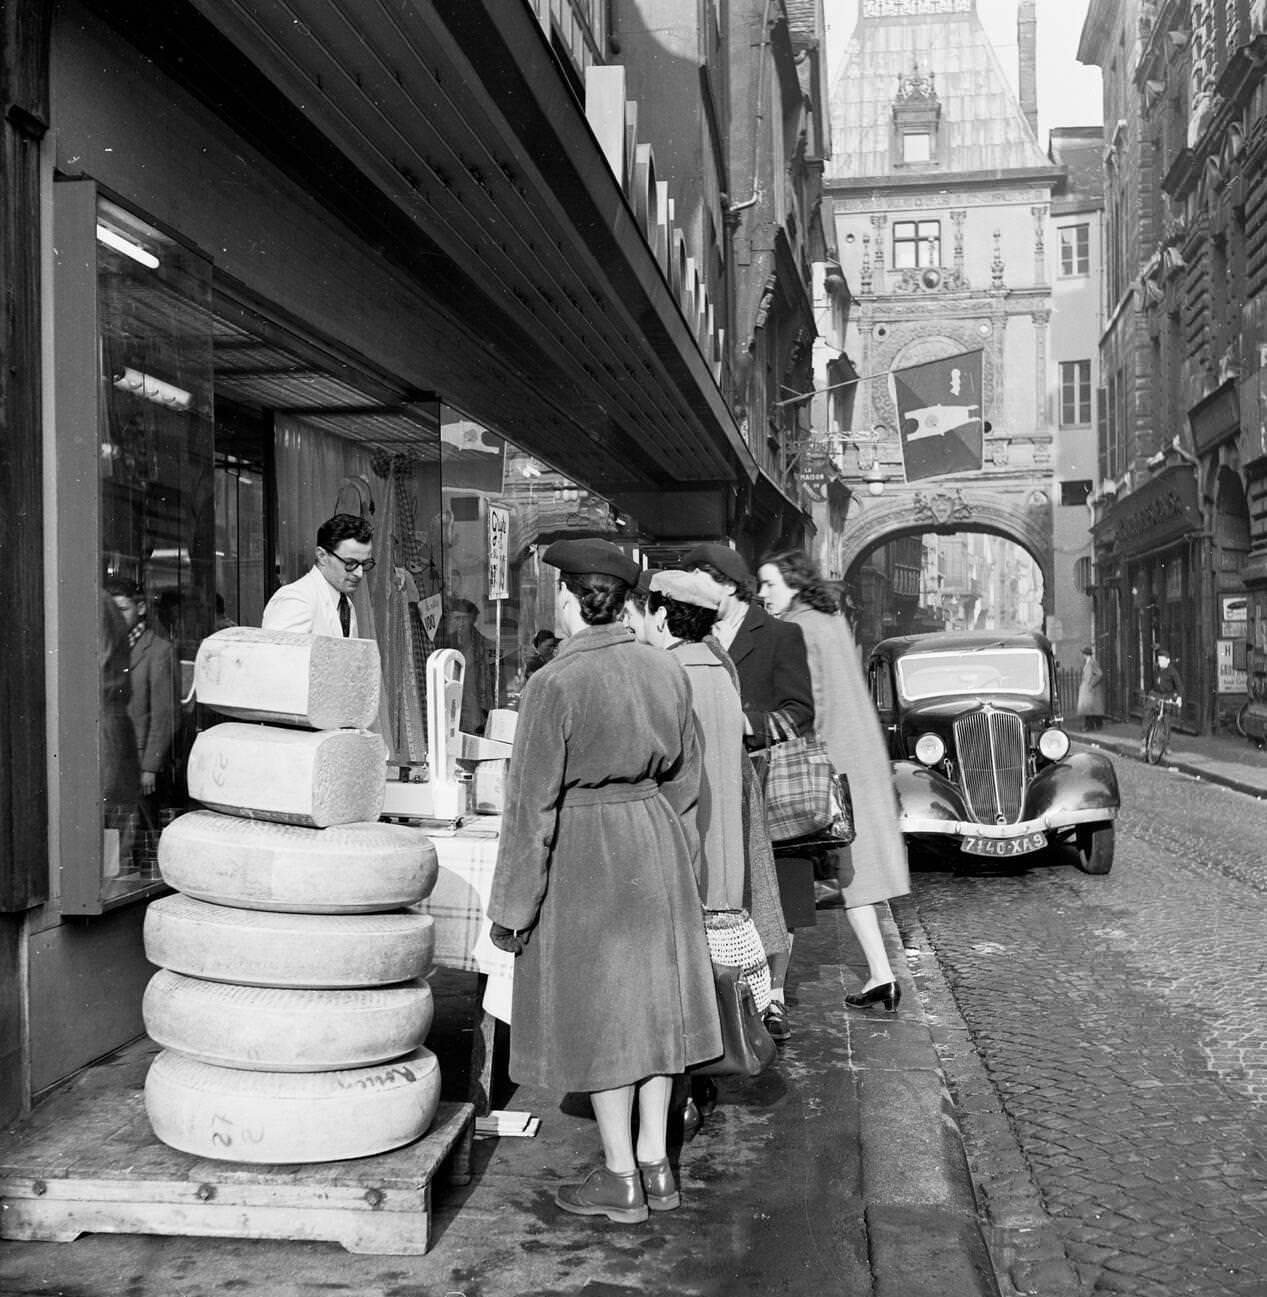 1950s: Female French Shoppers in Rouen Study Cheese Slices on Sale, France